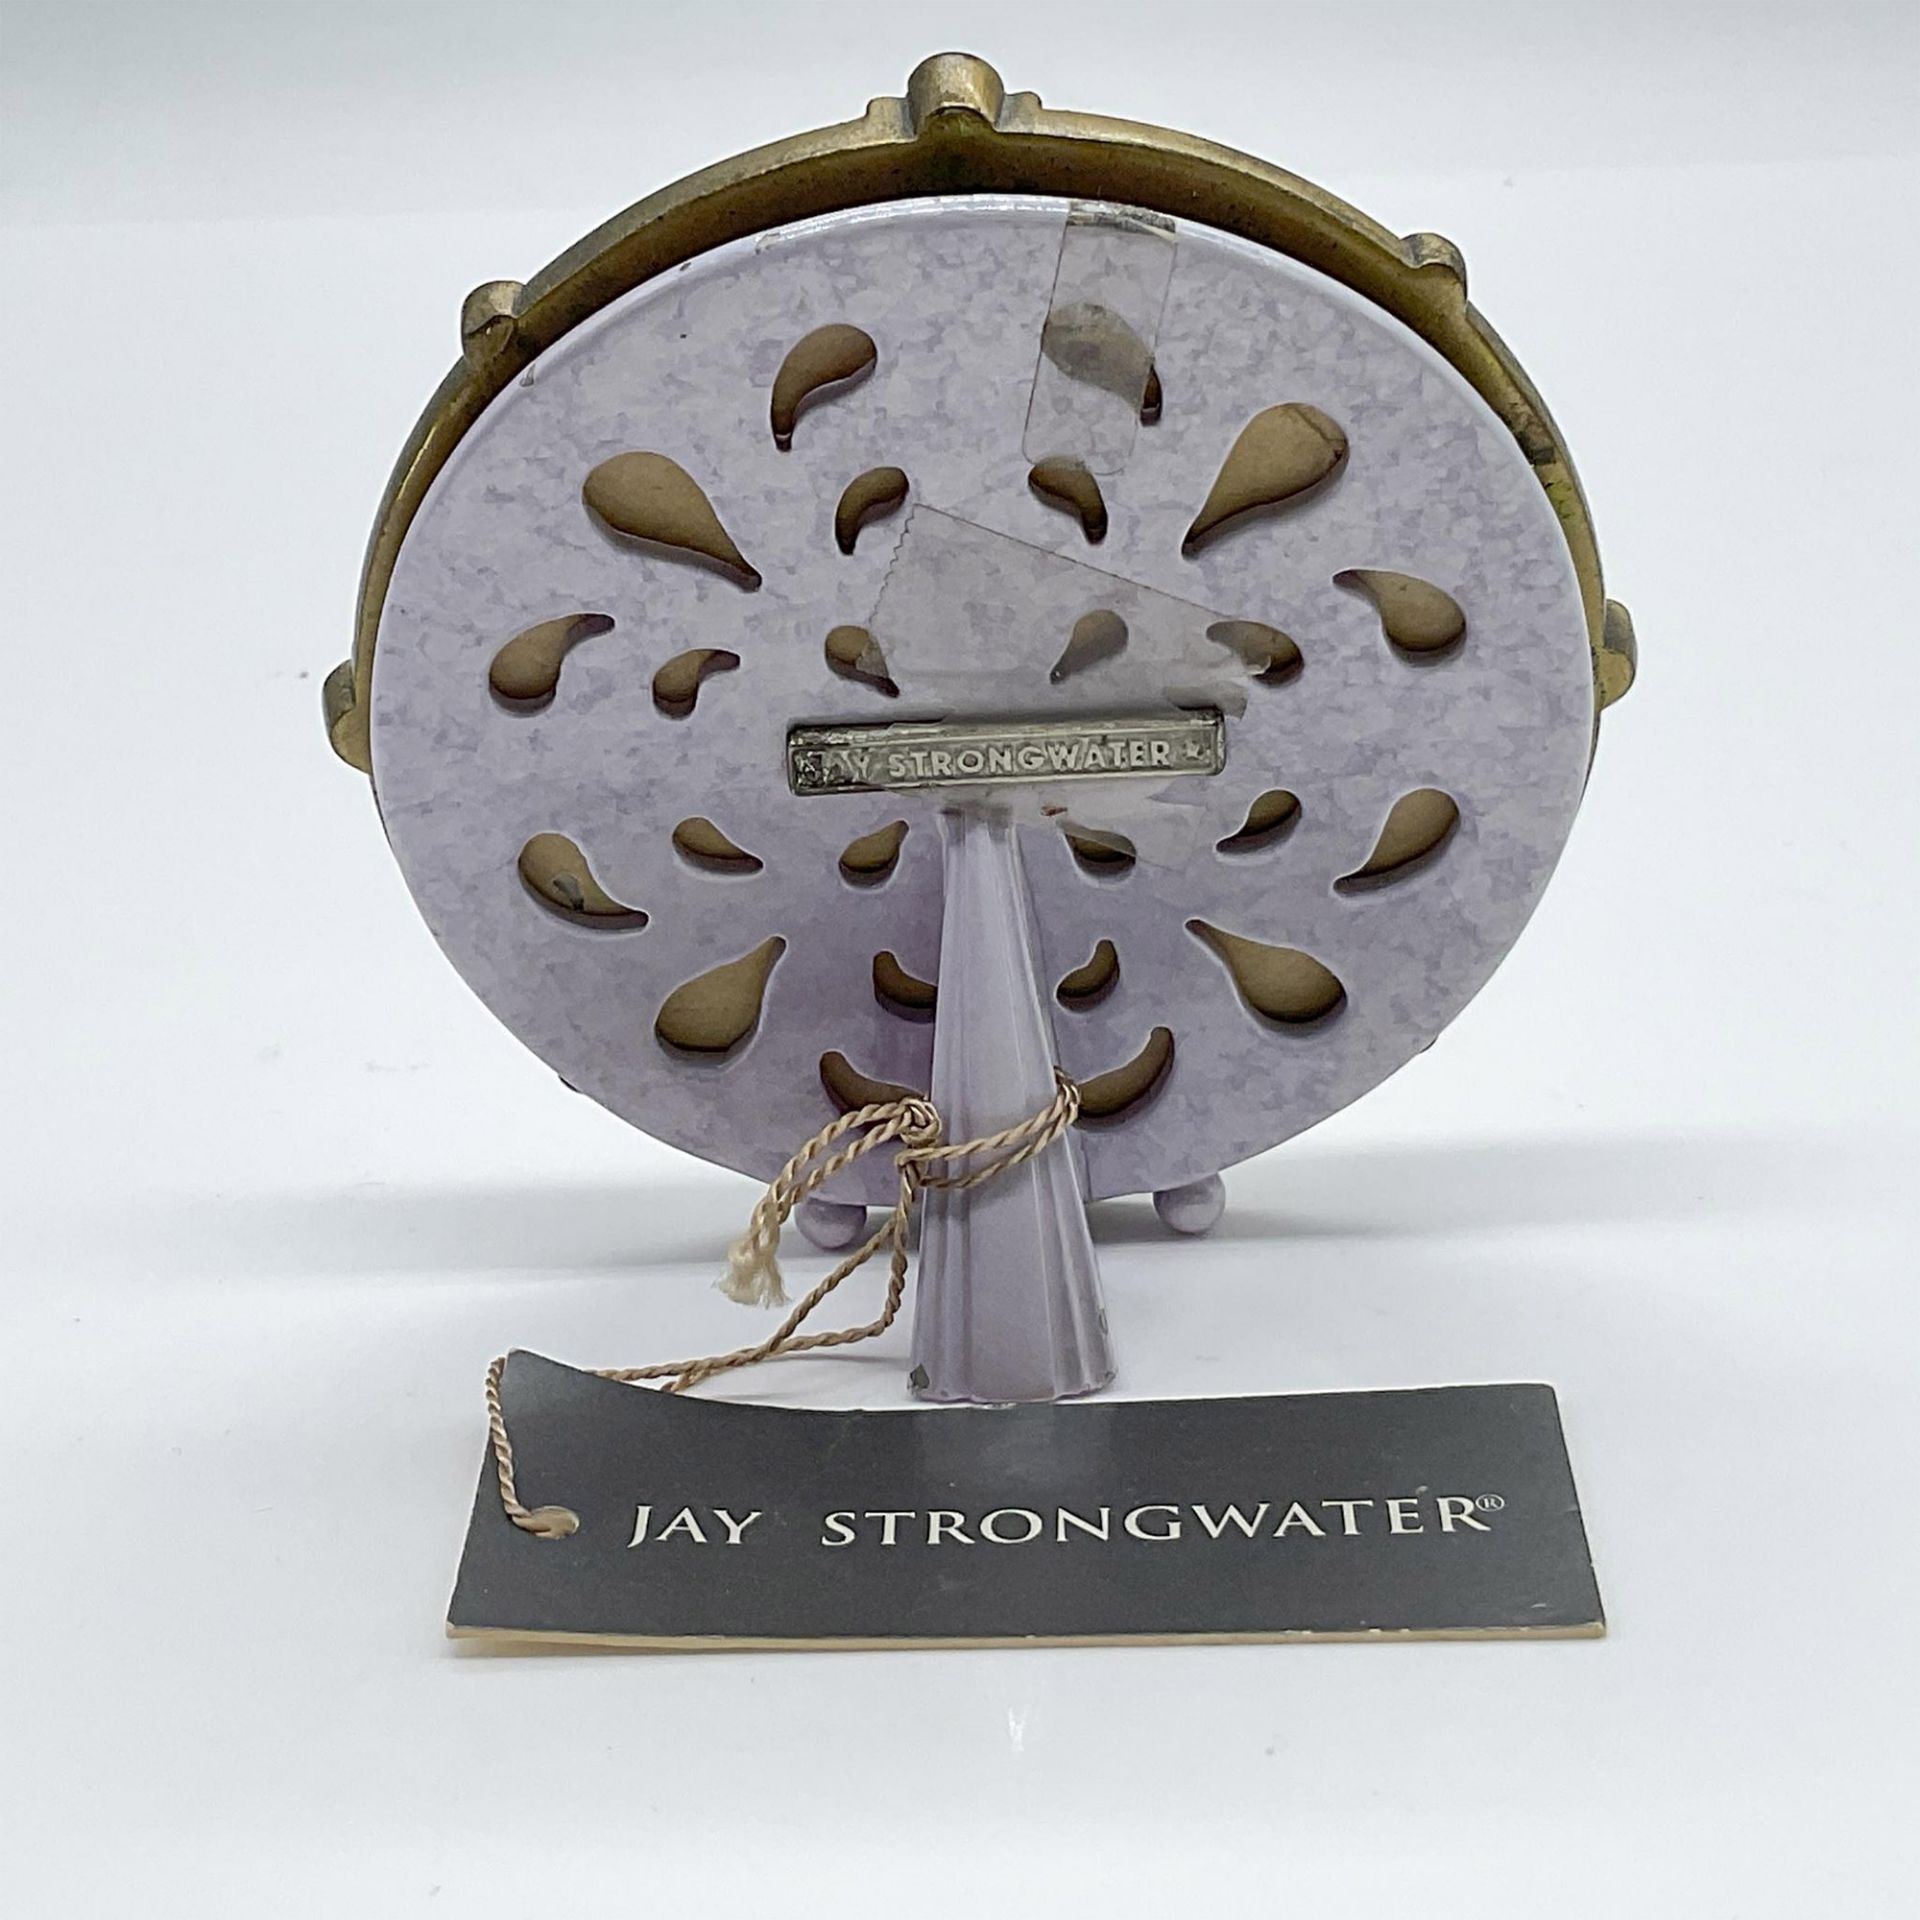 Jay Strongwater Jeweled Enamel Picture Frame - Image 2 of 3